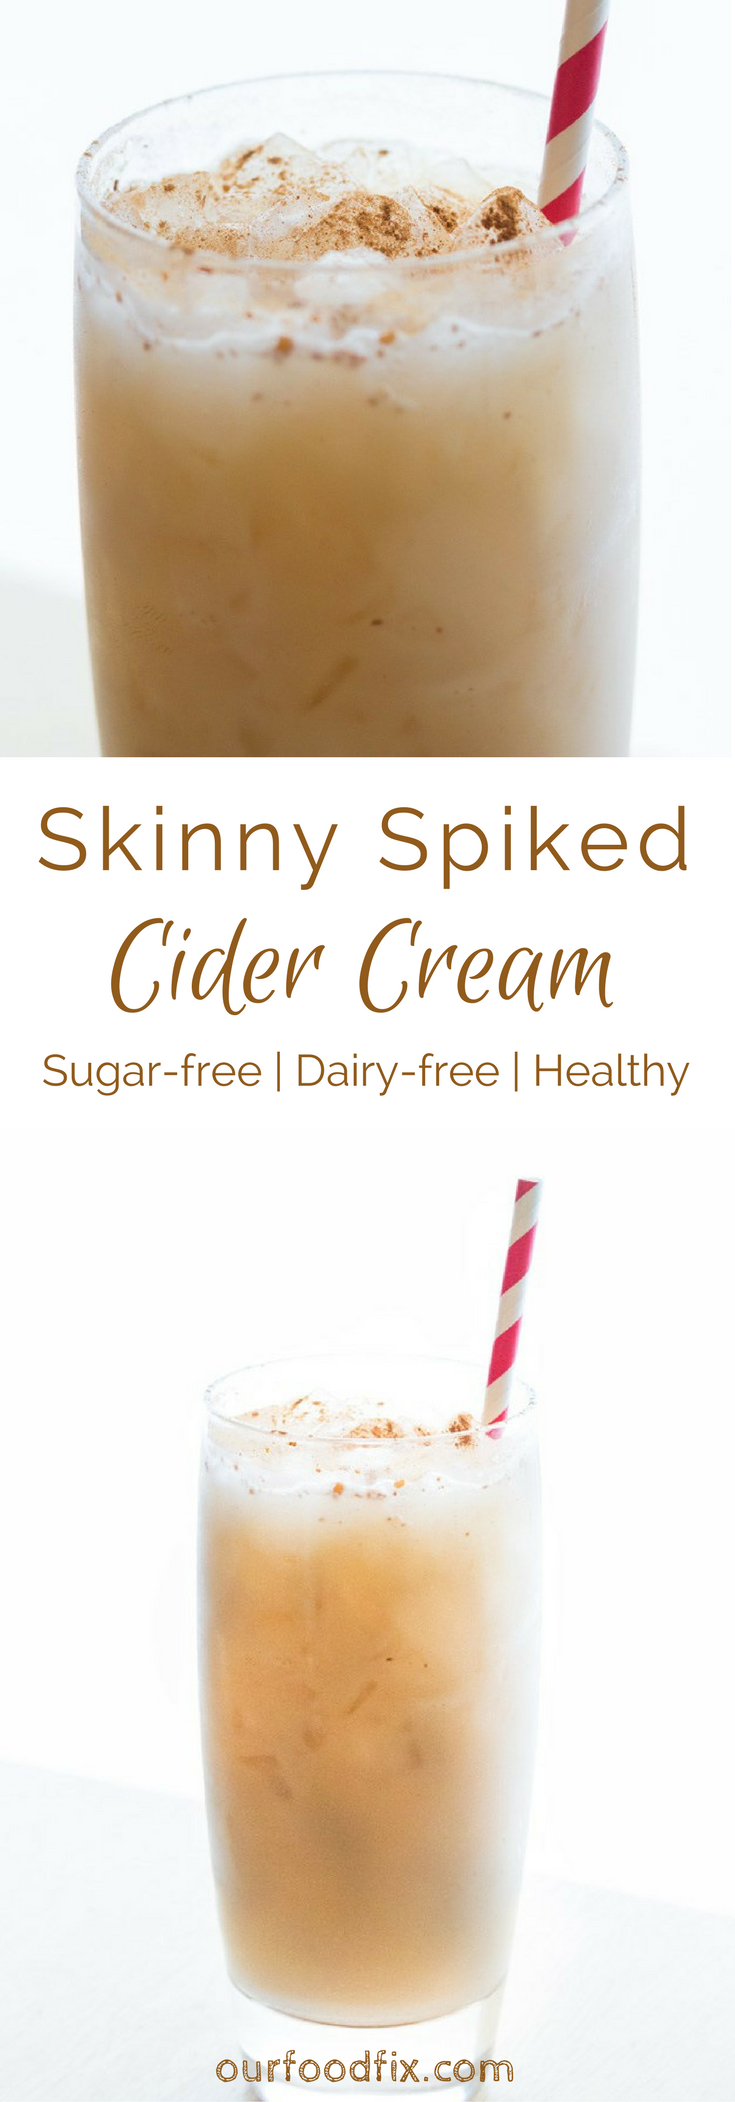 A new twist on the classic combination, Spiked Cider Cream is a sugar-free, dairy-free, light cocktail to enjoy throughout the holiday season. Cocktail recipes | Holiday recipes | Holiday drinks | Party drinks | Beverages | Drinks | Entertaining | Easy recipe | Apple cider recipe | Dairy free recipe | Refined sugar free #seriouslysimplerecipe #theWRlife #holidaycocktails